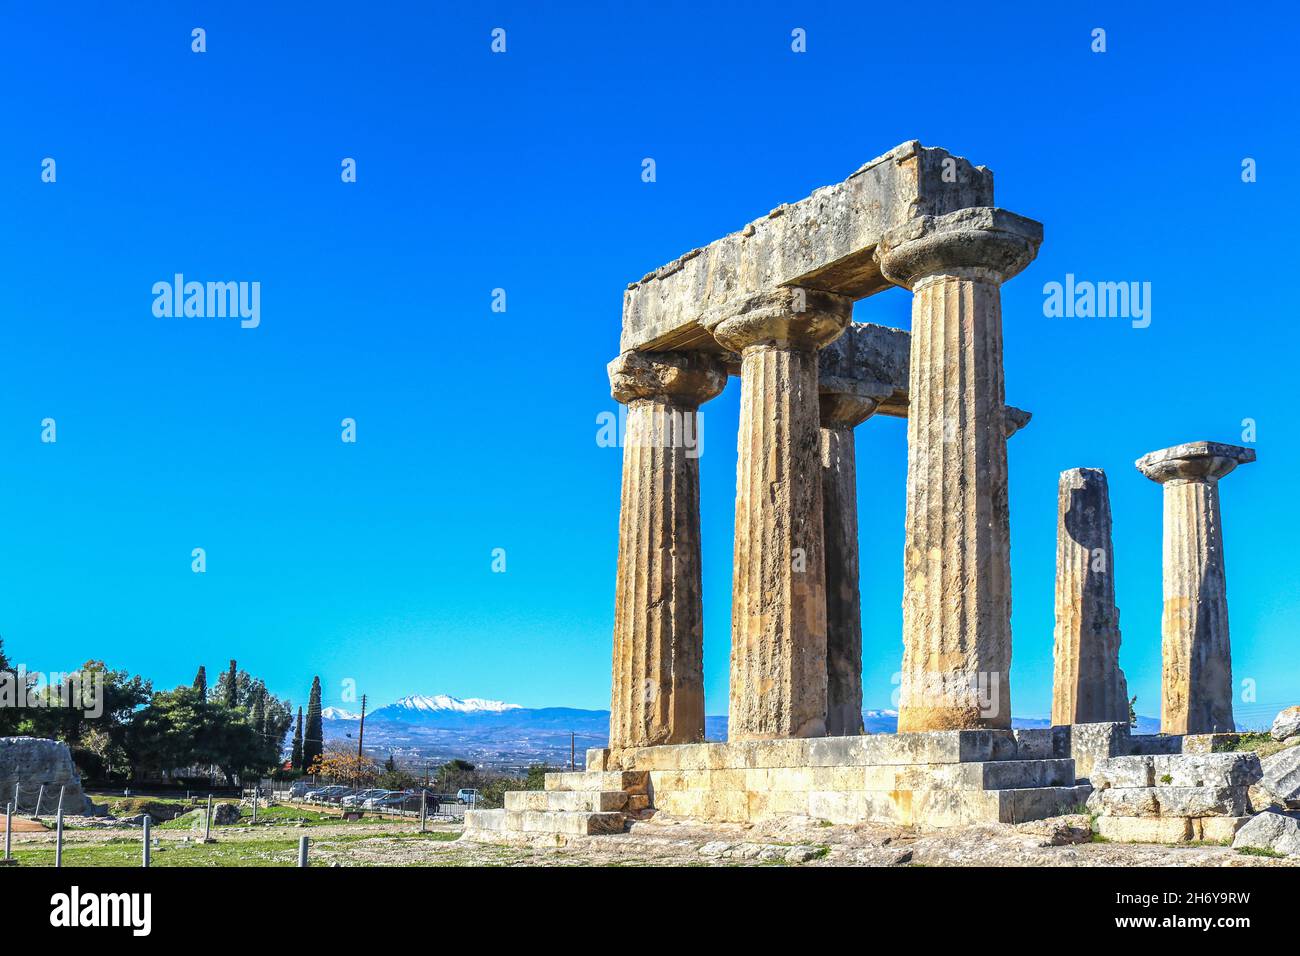 Ruins and columns at Ancient Corinth Greece under extremely blue sky with snow-capped mountains of the mainland across the Corinth Canal in the distan Stock Photo